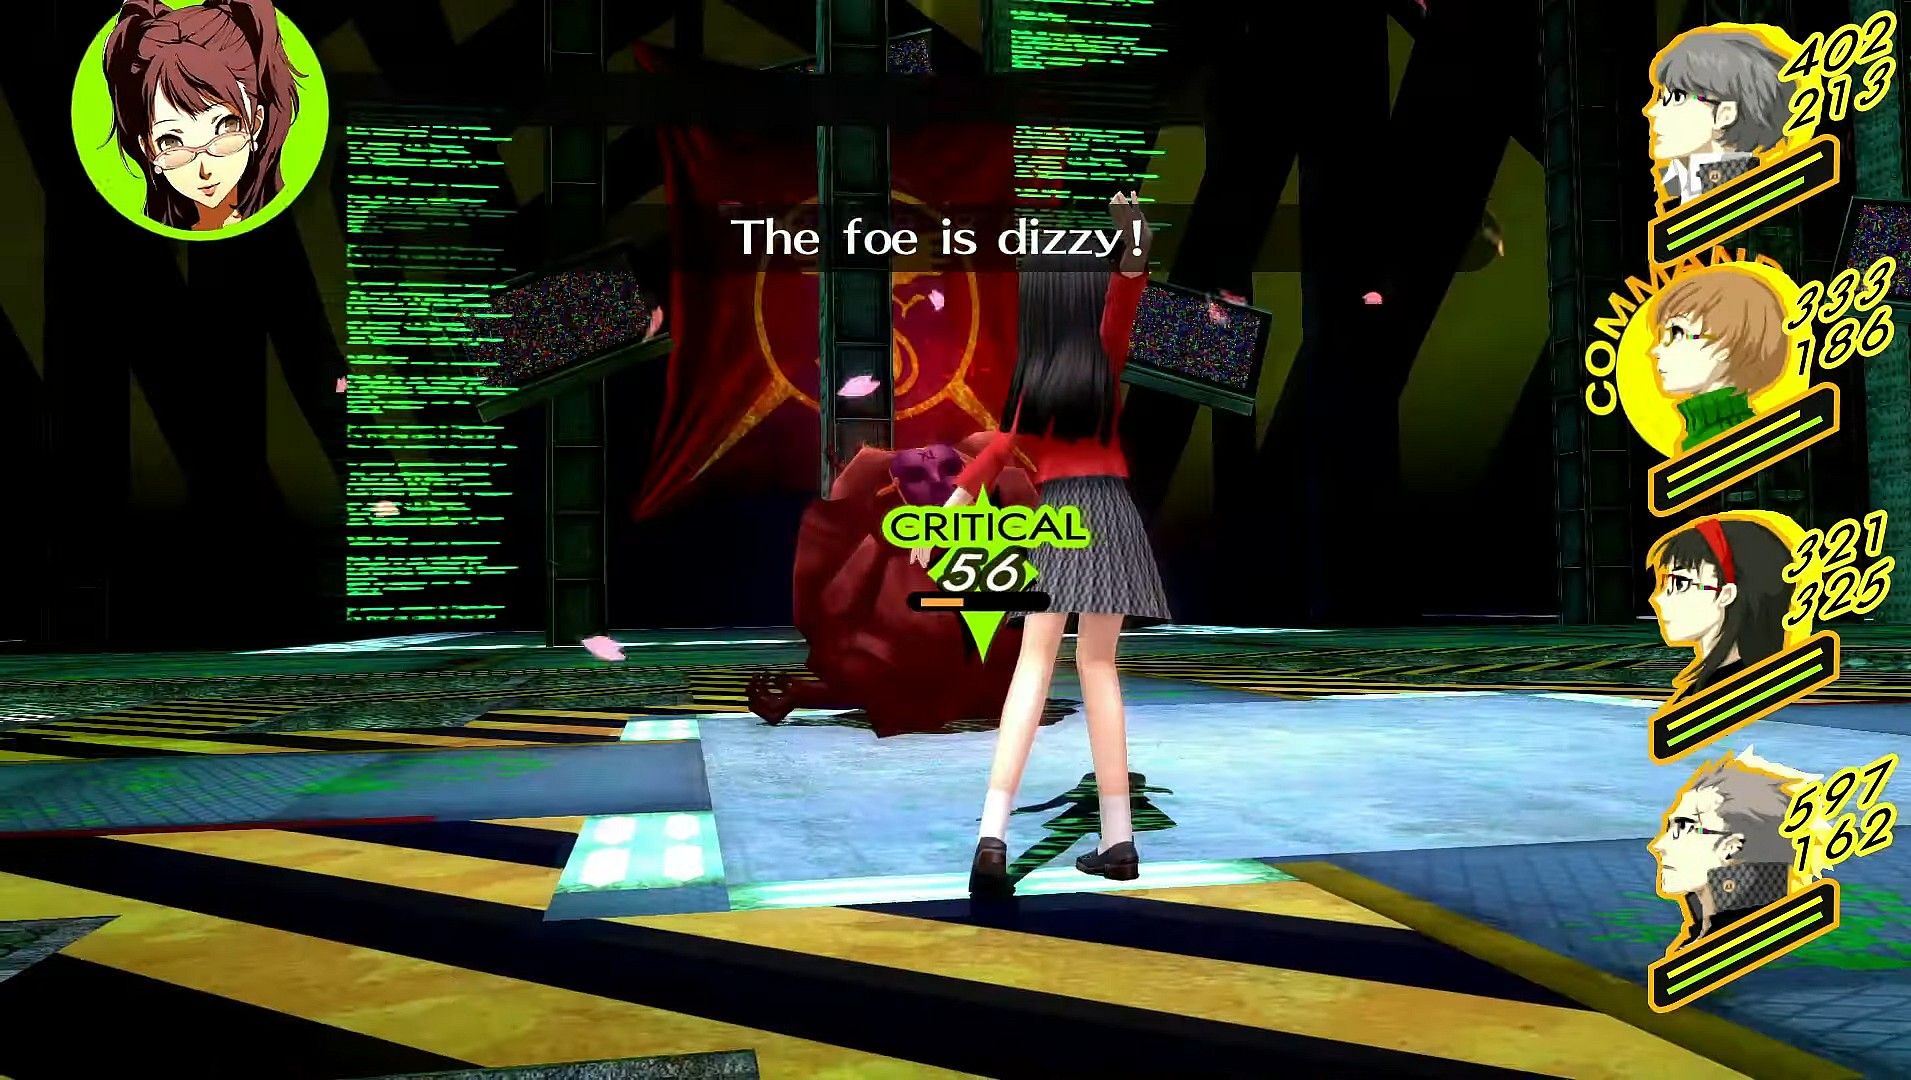 yukiko knocking down a shadow with a critical hit and inflicting dizziness in the secret lab dungeon in p4g